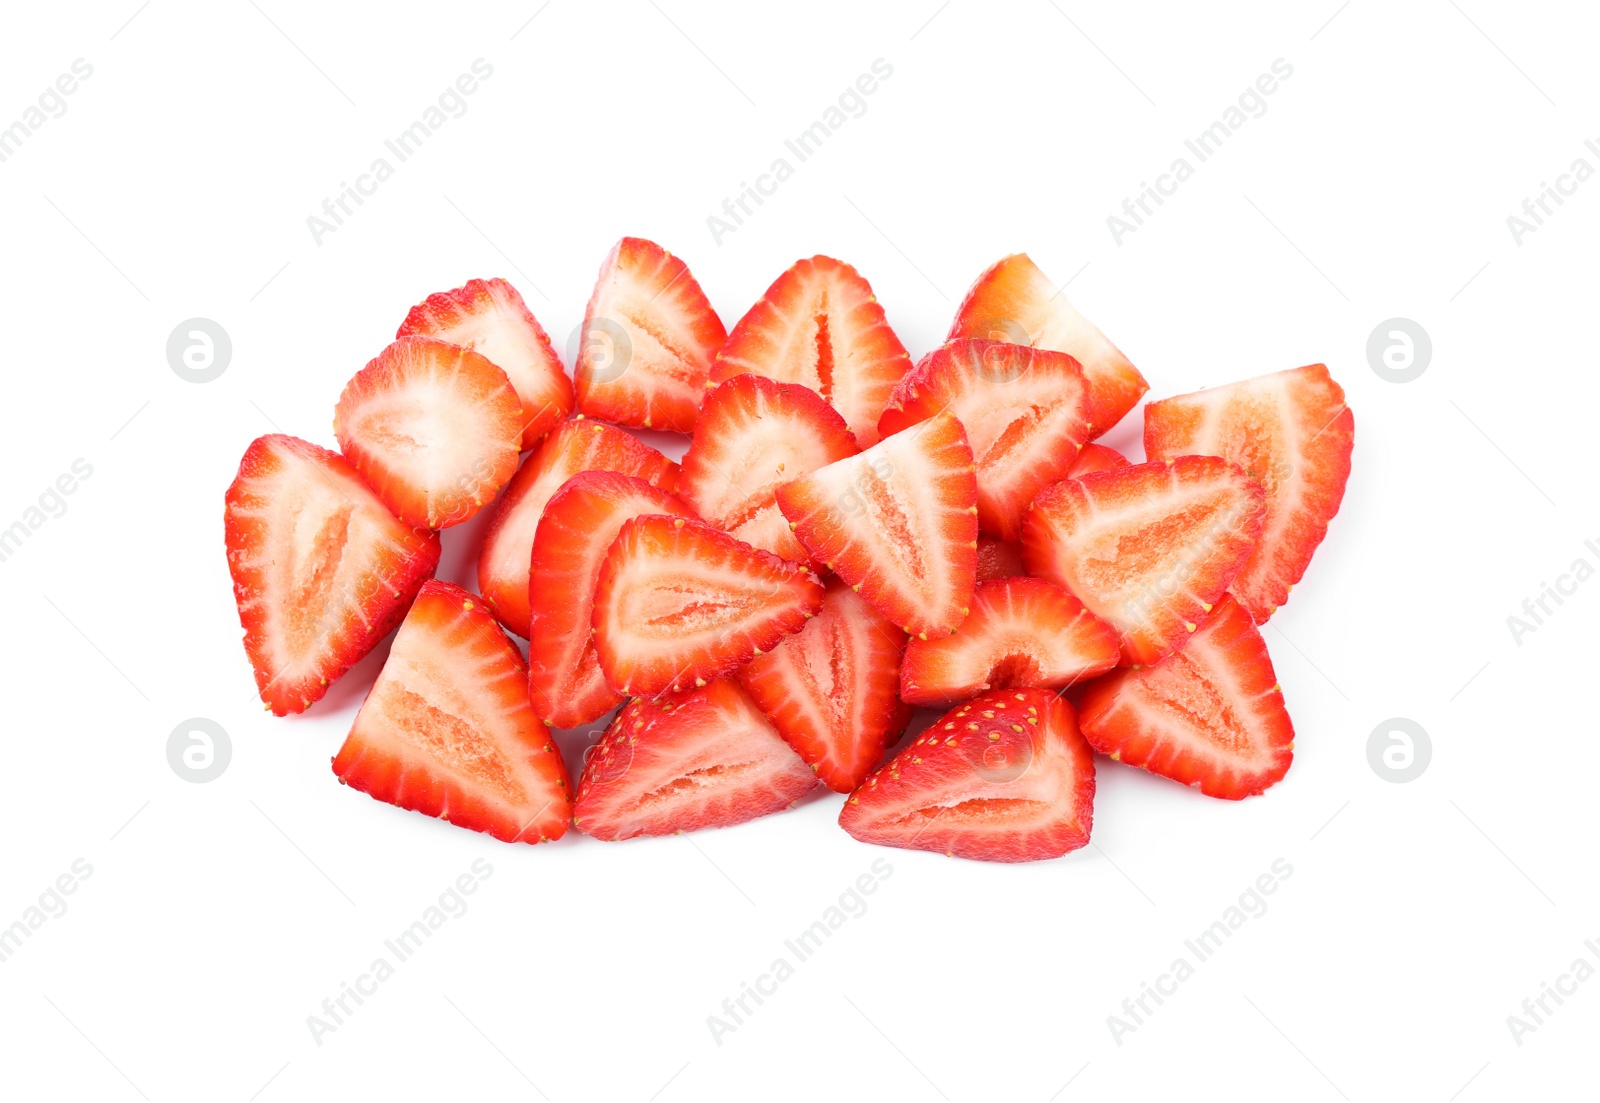 Photo of Halves of delicious fresh strawberries on white background, top view